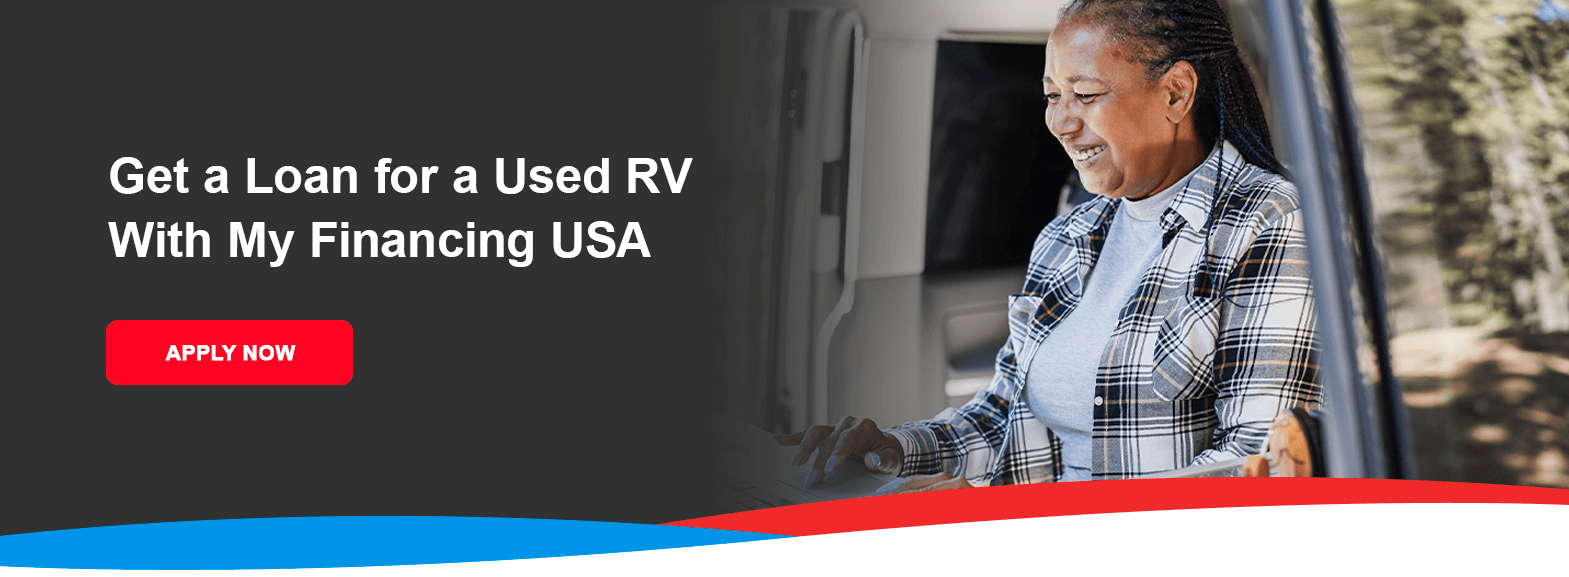 Get a Loan for a Used RV With My Financing USA. Apply now!